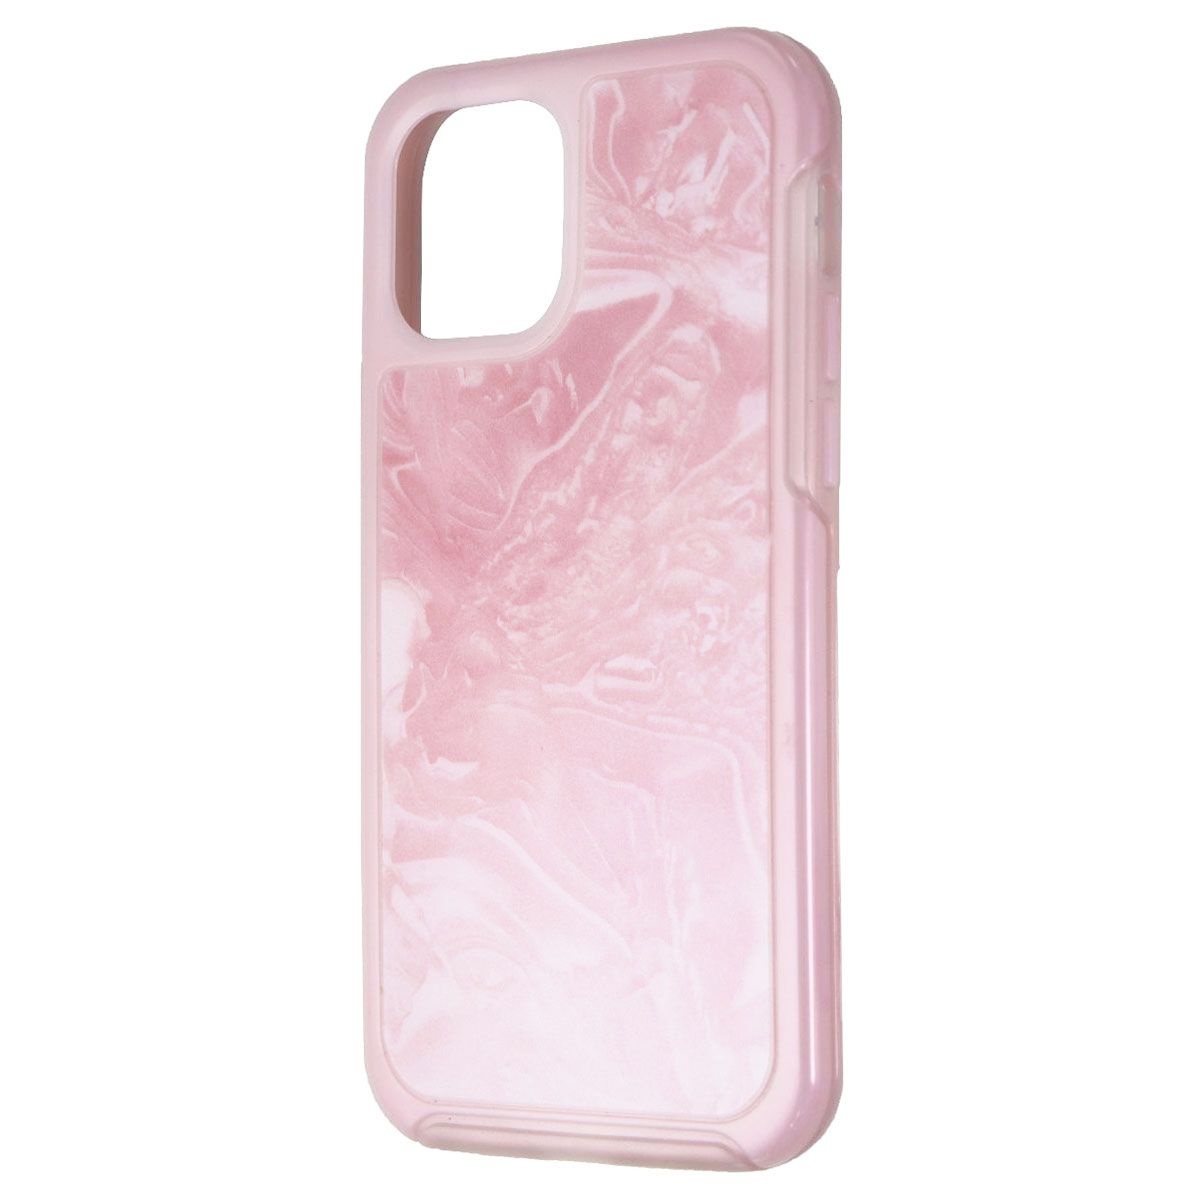 OtterBox Symmetry Case for Apple iPhone 12 &amp; iPhone 12 Pro - Shell-Shocked/Pink - image 1 of 3